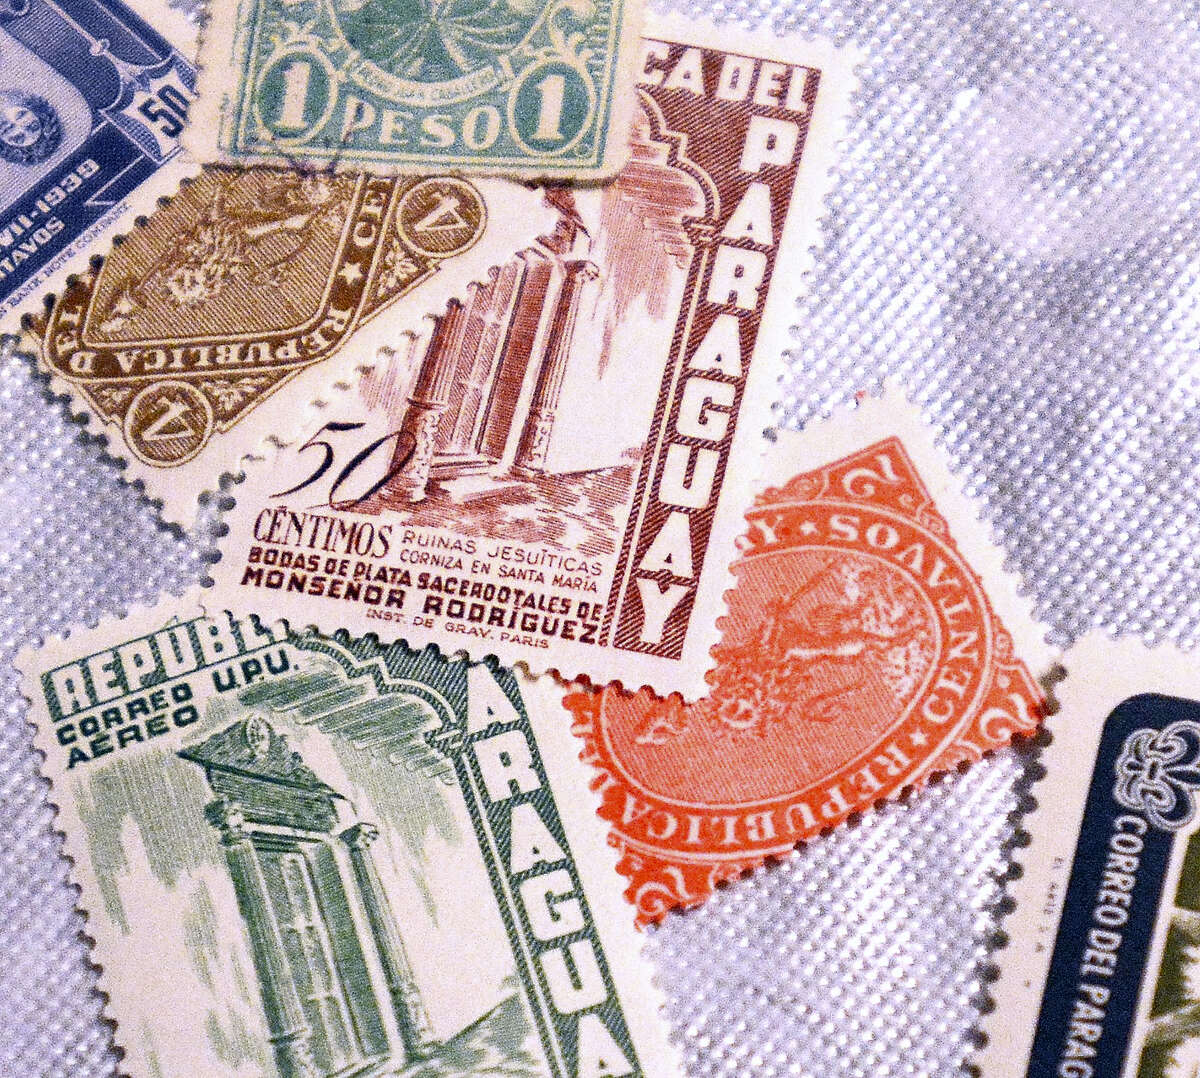 Middletown stamp collecting workshop will introduce basics of philately